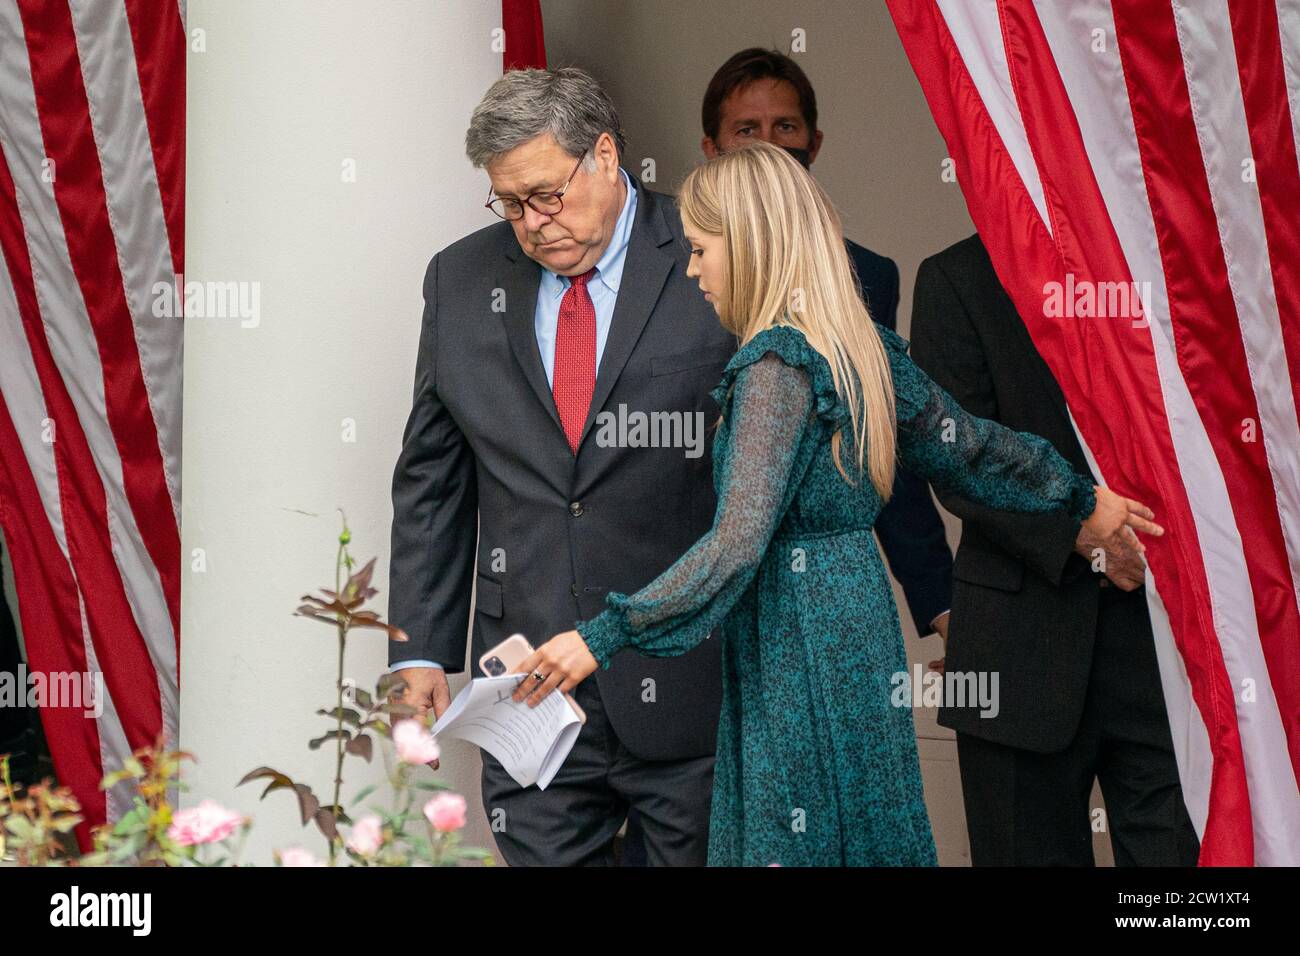 United States Attorney General William P. Barr is escorted in prior to President Donald Trump making an announcement in the Rose Garden to nominate Judge Amy Coney Barrett for the Supreme Court seat left vacant by Justice Ruth Bader Ginsburg's death last week Sep. 9/26/20, 2020 in Washington DC. The Republican-controlled Senate now has little time if they opt to confirm the nominee ahead of Election Day. (Photo by Photo Ken Cedeno/Sipa USA ) Credit: Sipa USA/Alamy Live News Stock Photo